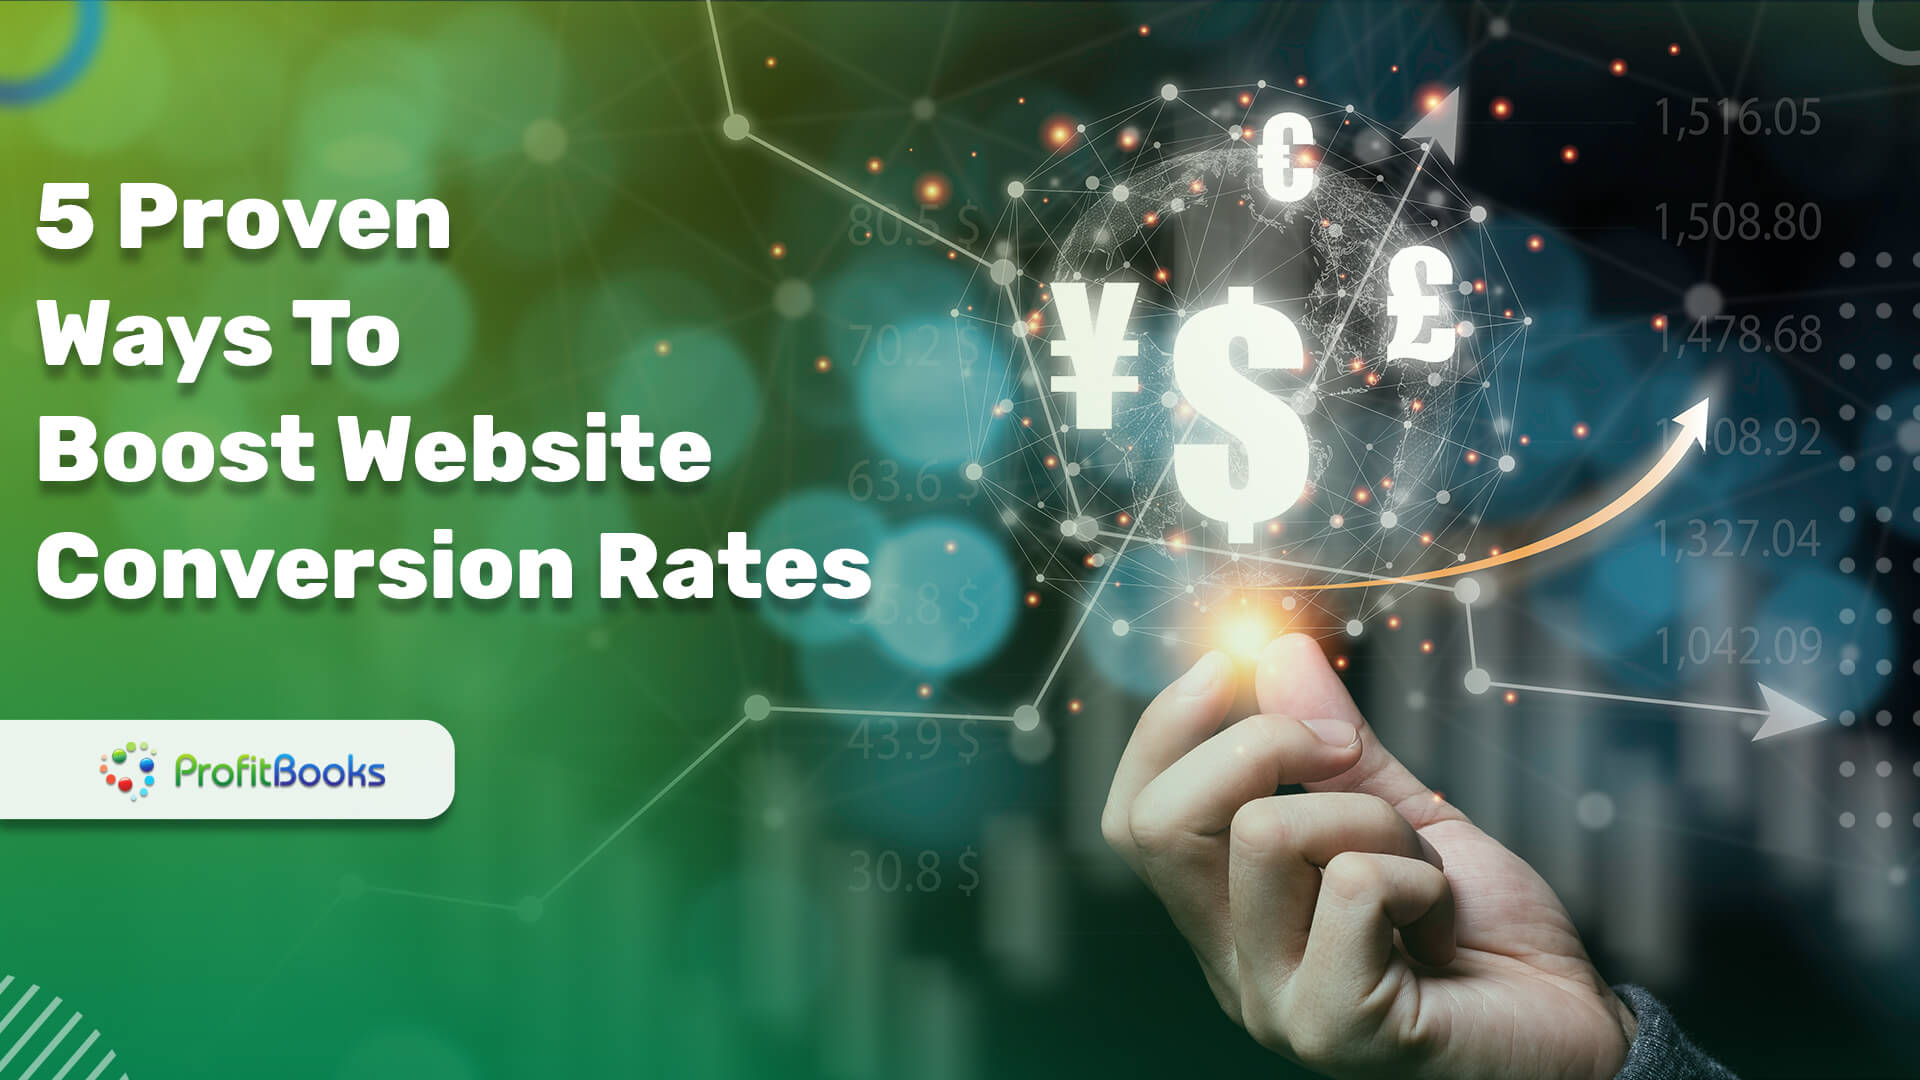 5 Proven Ways To Boost Website Conversion Rates